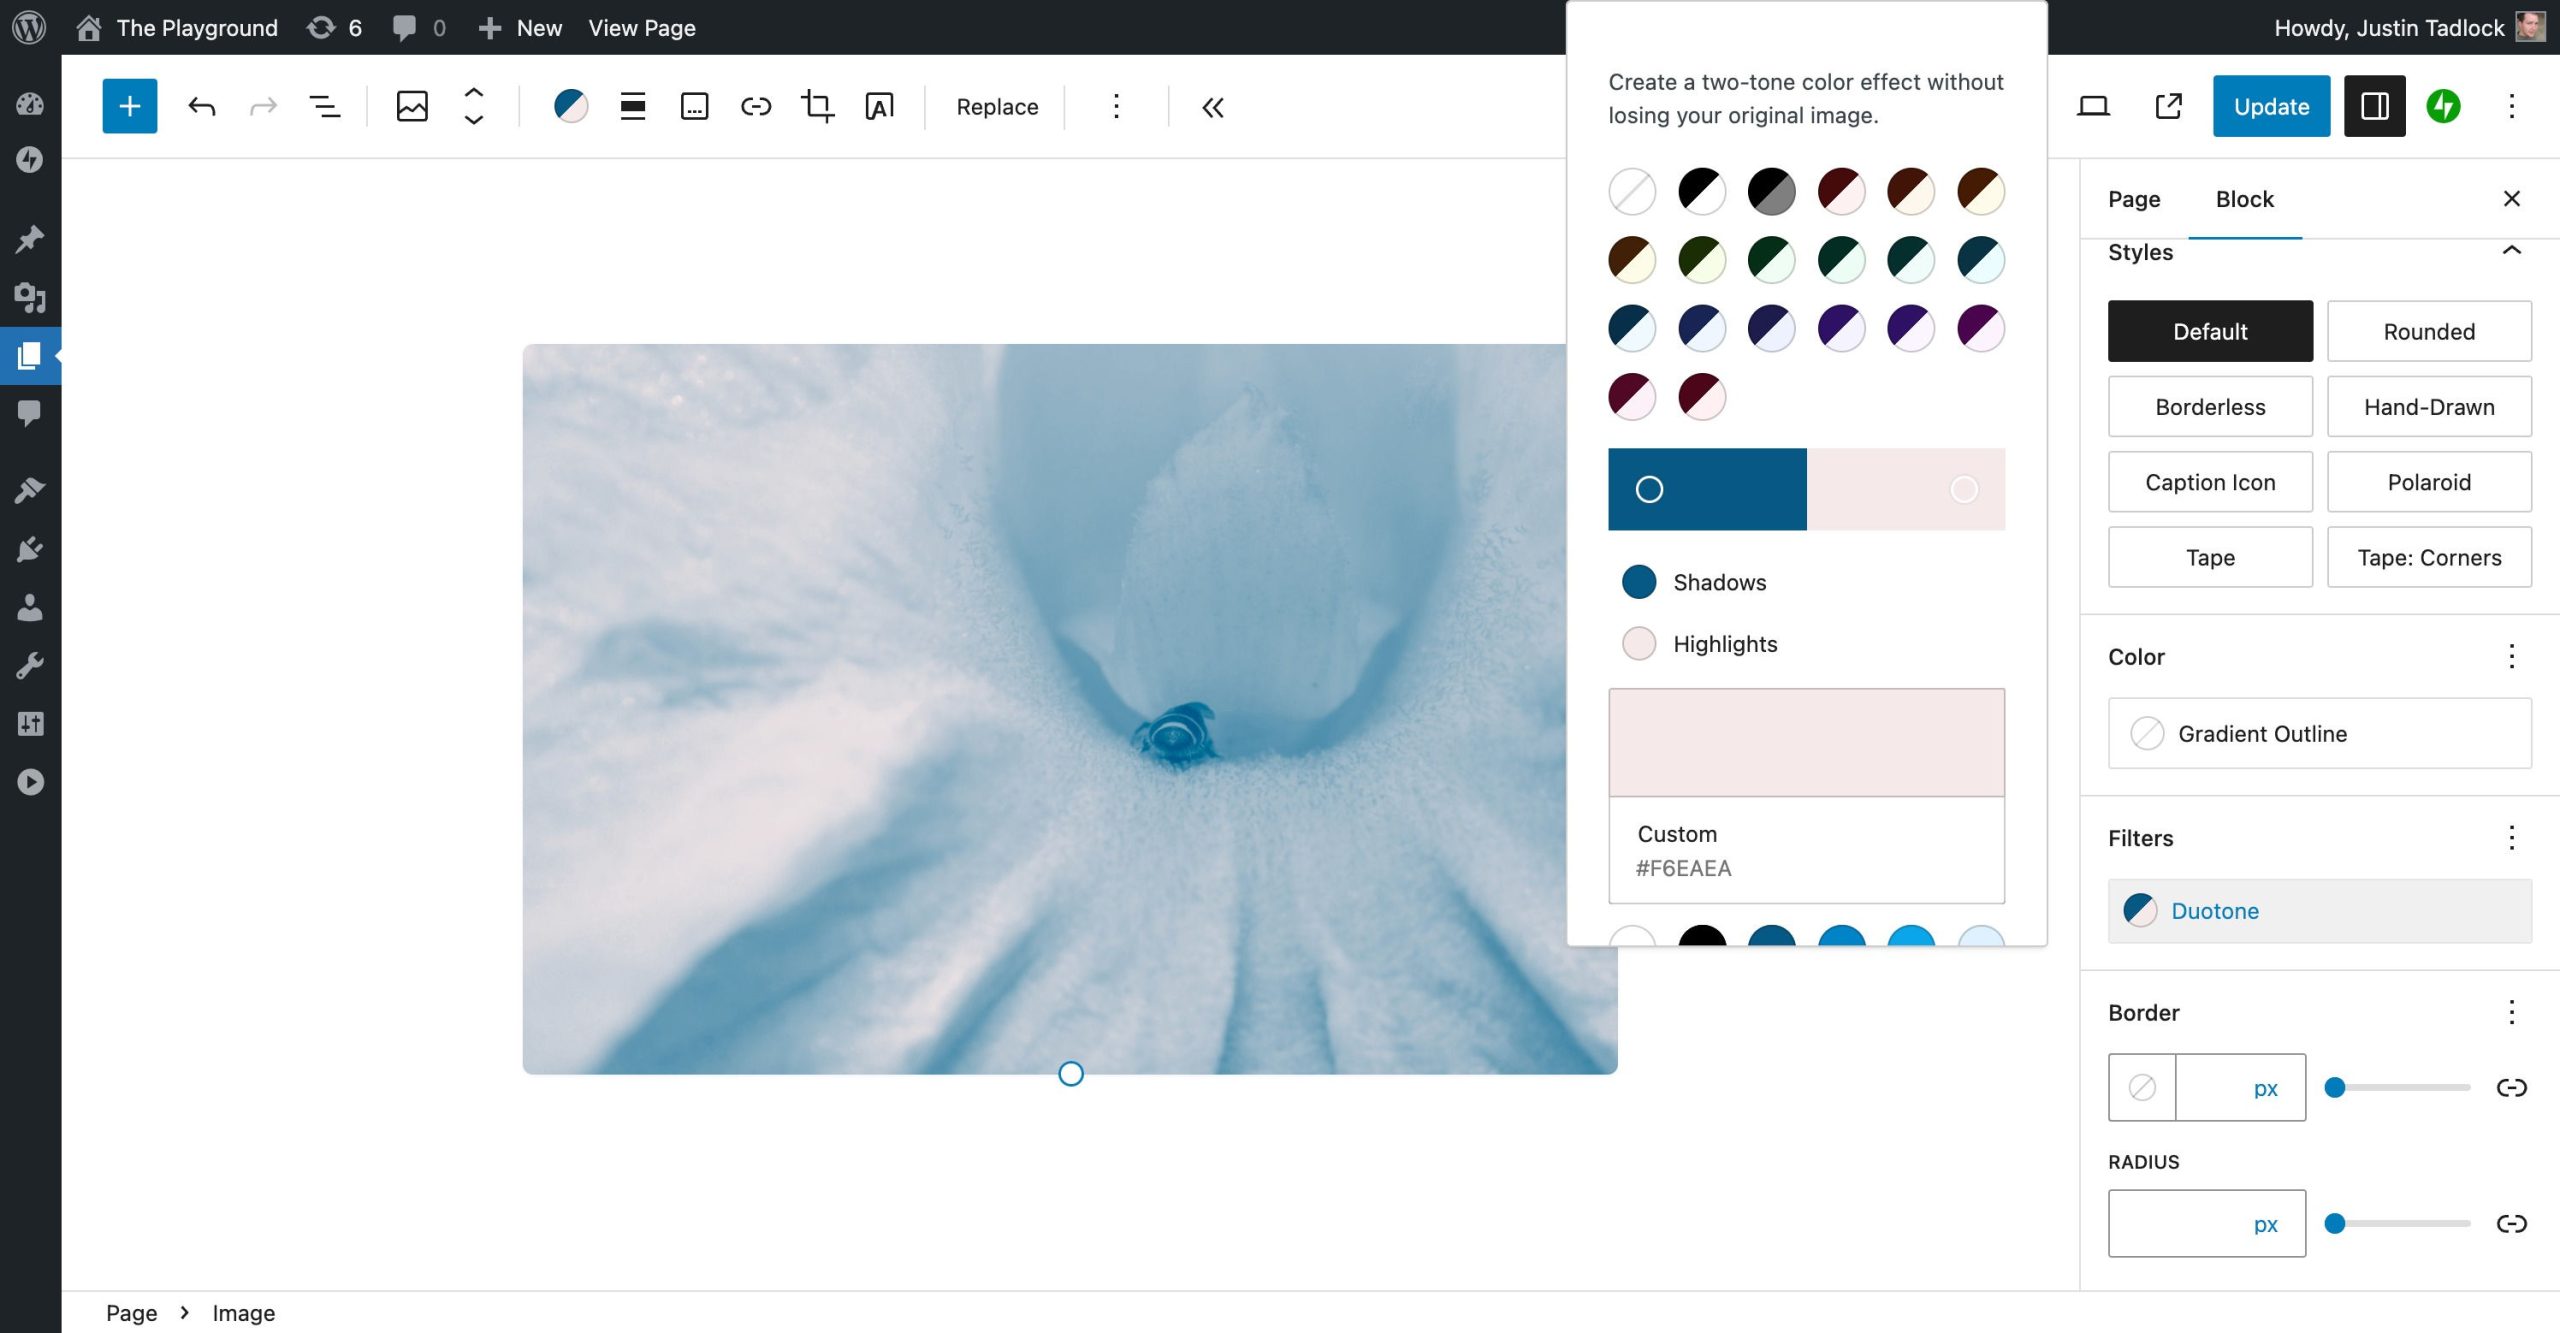 WordPress post editor showing an Image block with the custom duotone filters option open.